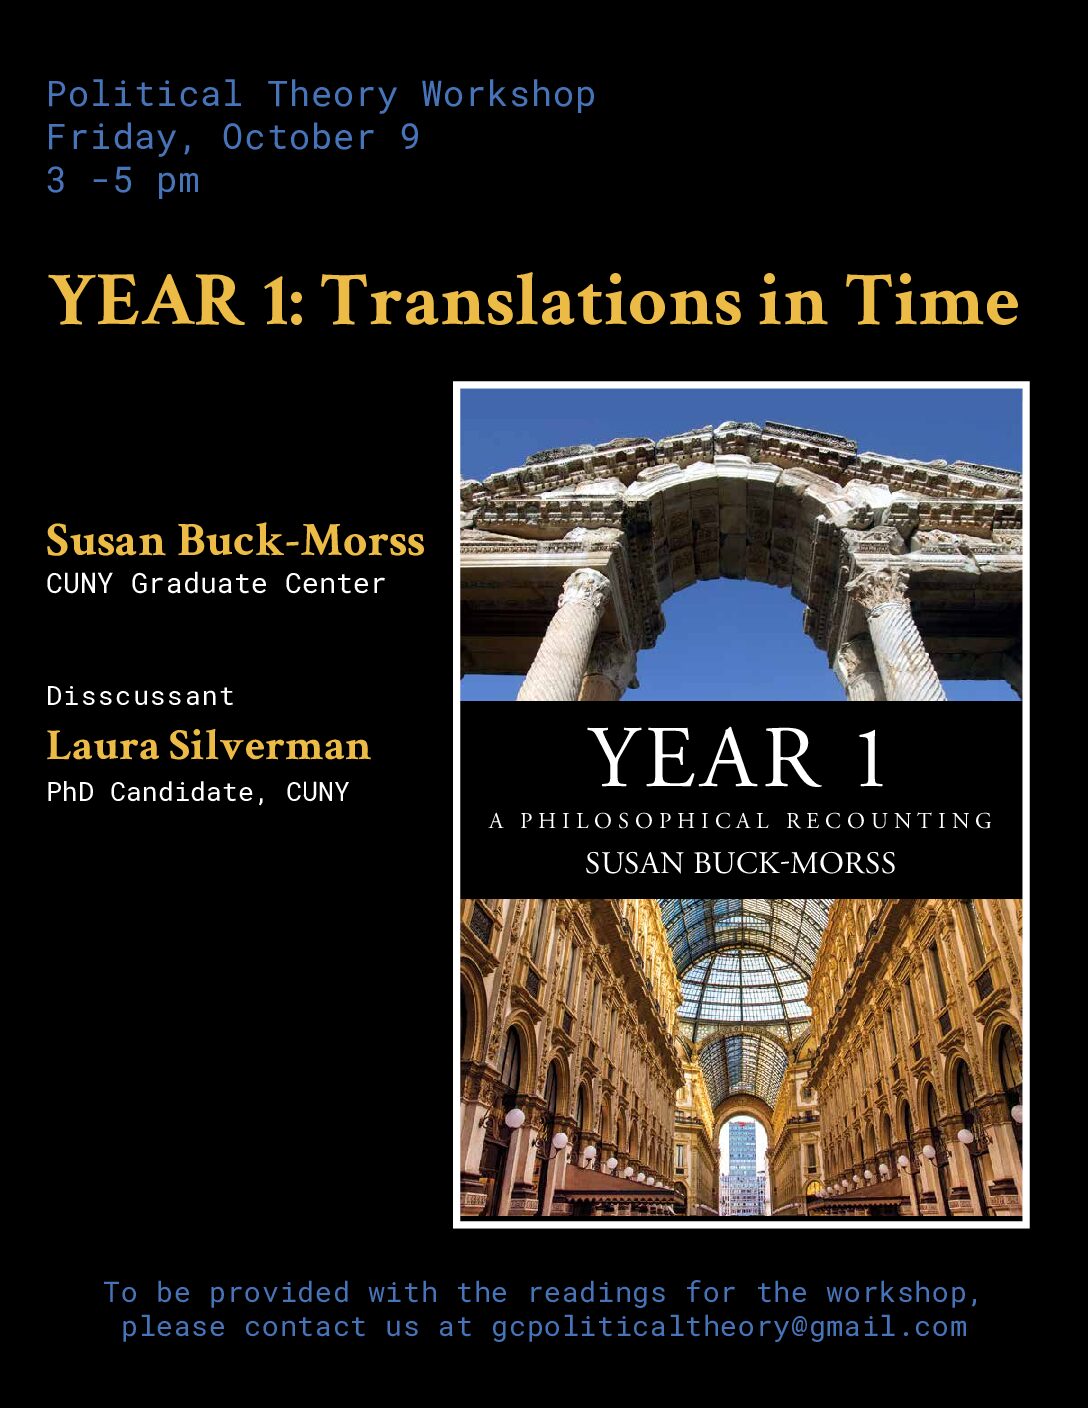 Political Theory Workshop: Susan Buck-Morss, "YEAR 1: Translations in Time," Friday, October 9, 3-5pm